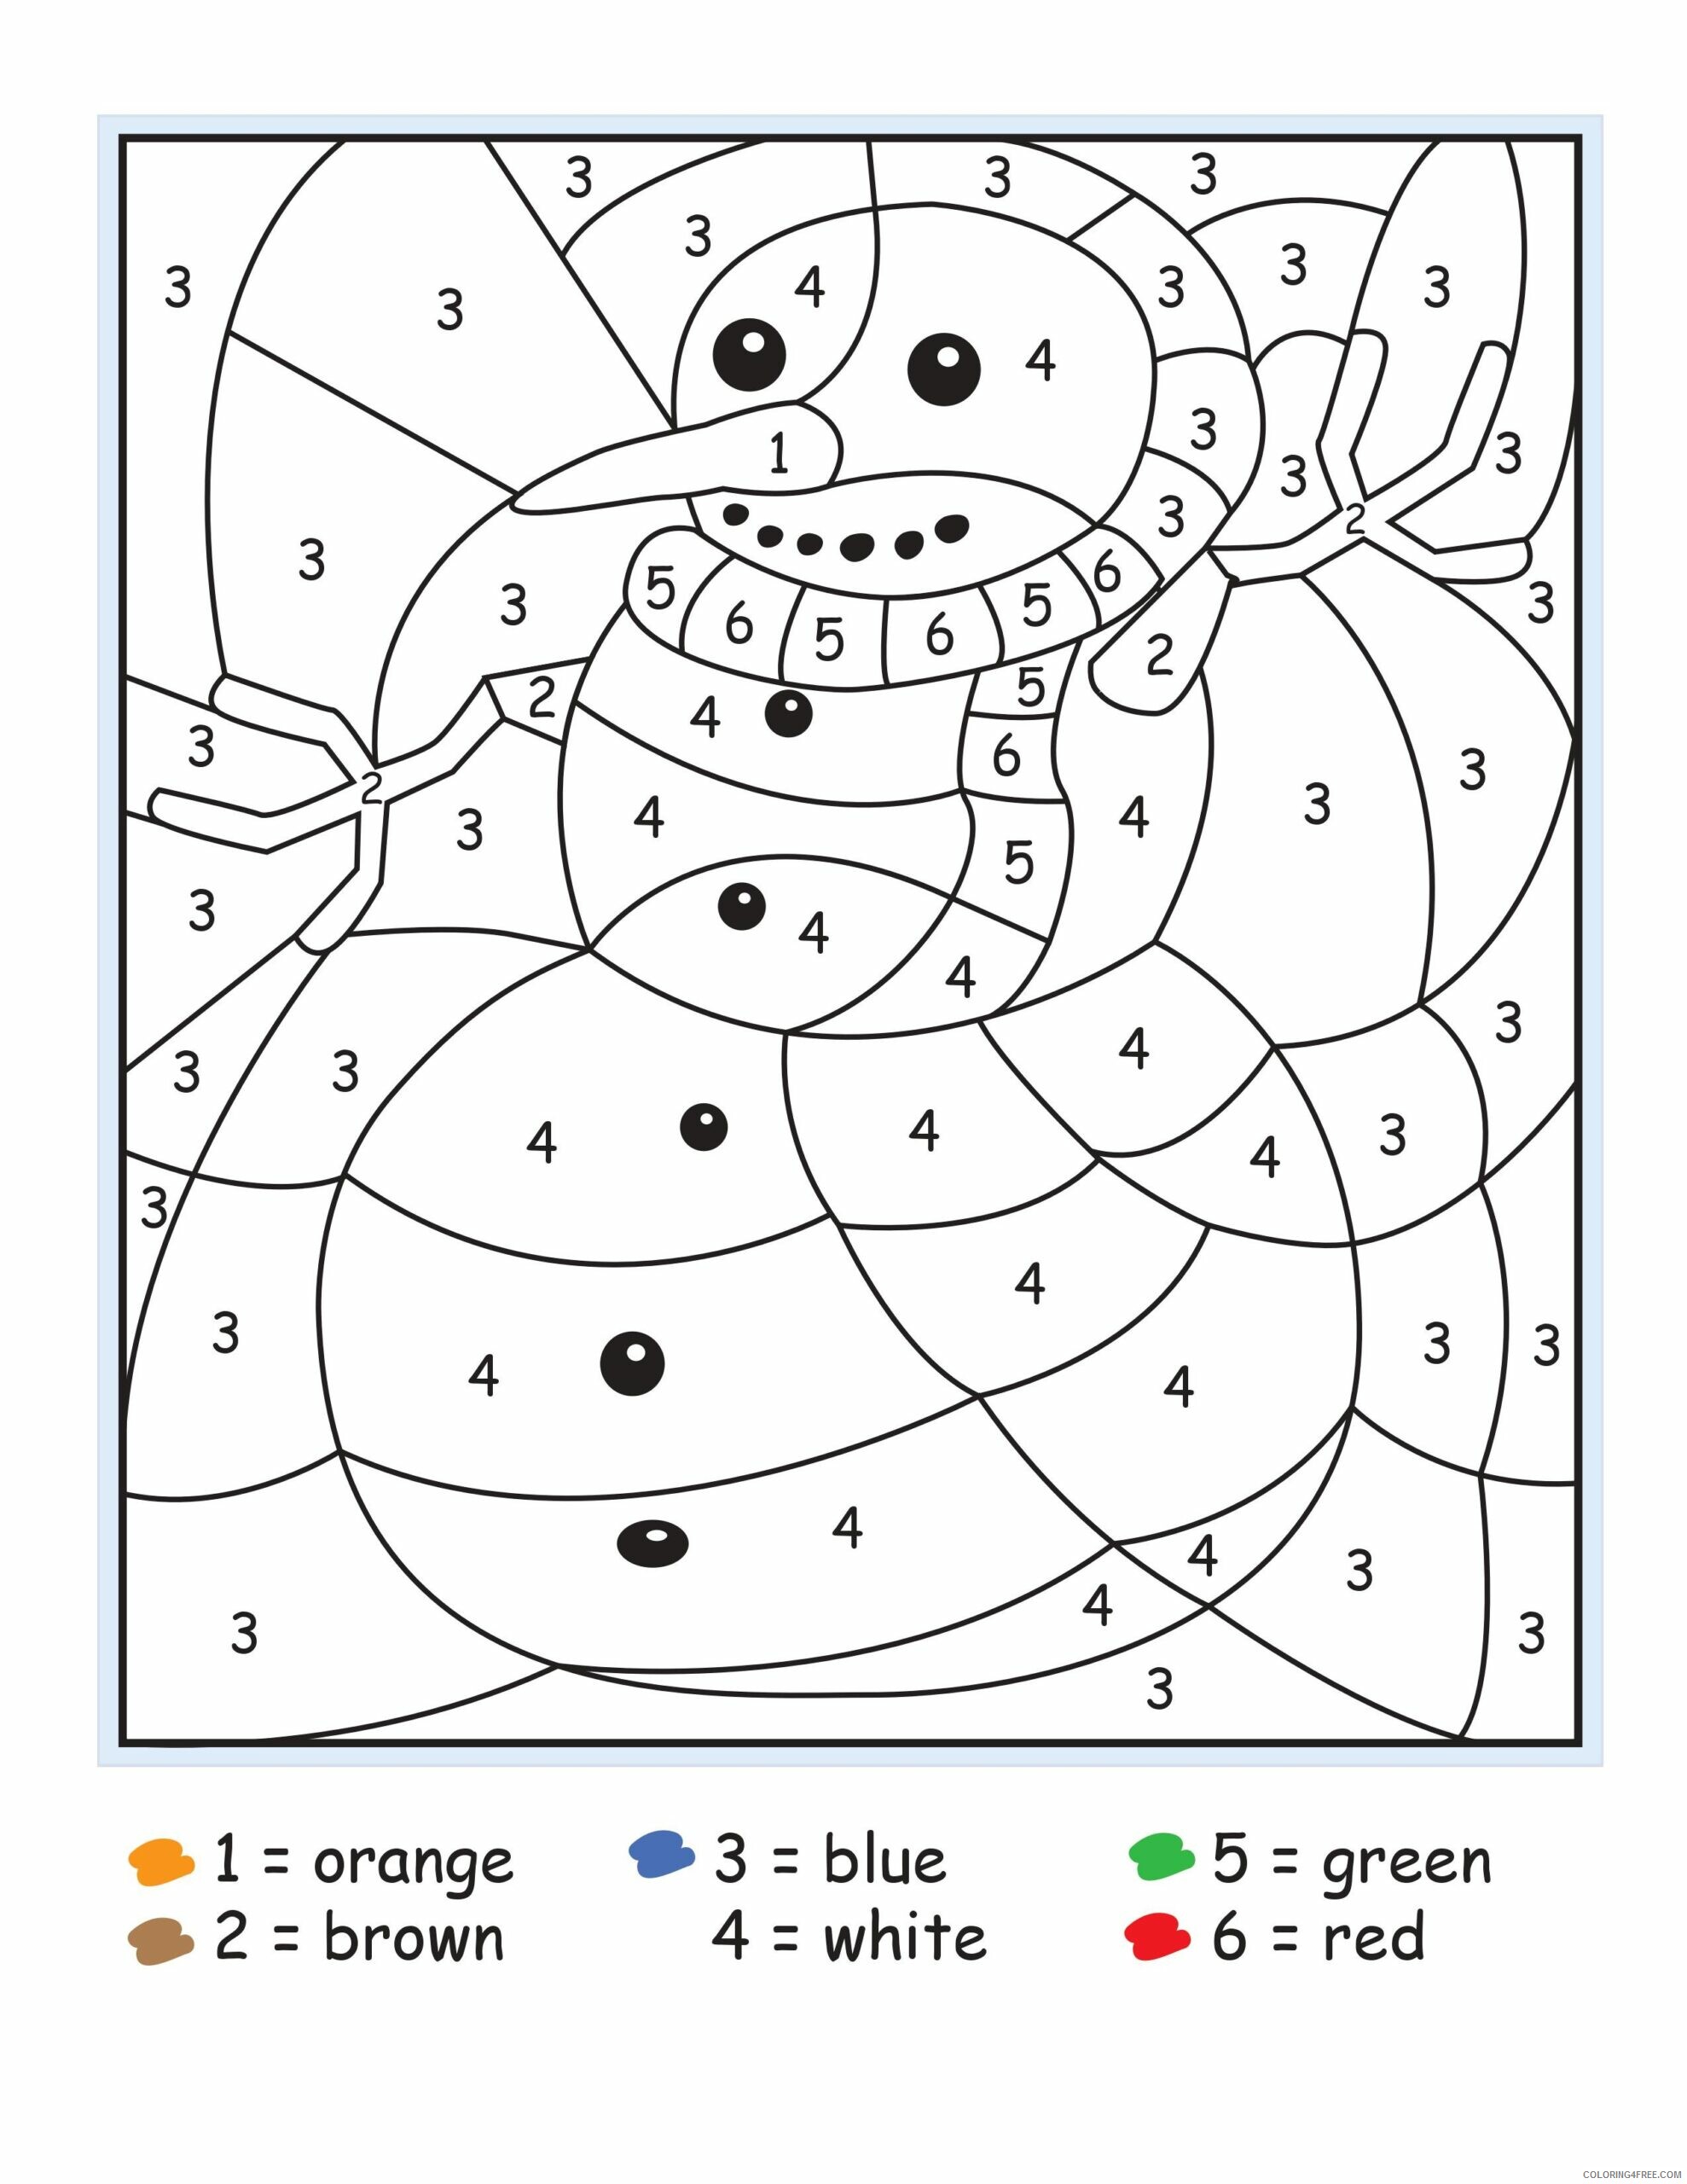 Snowman Coloring Pages Snowman By Number Kindergarten Printable 21 5578 Coloring4free Coloring4free Com